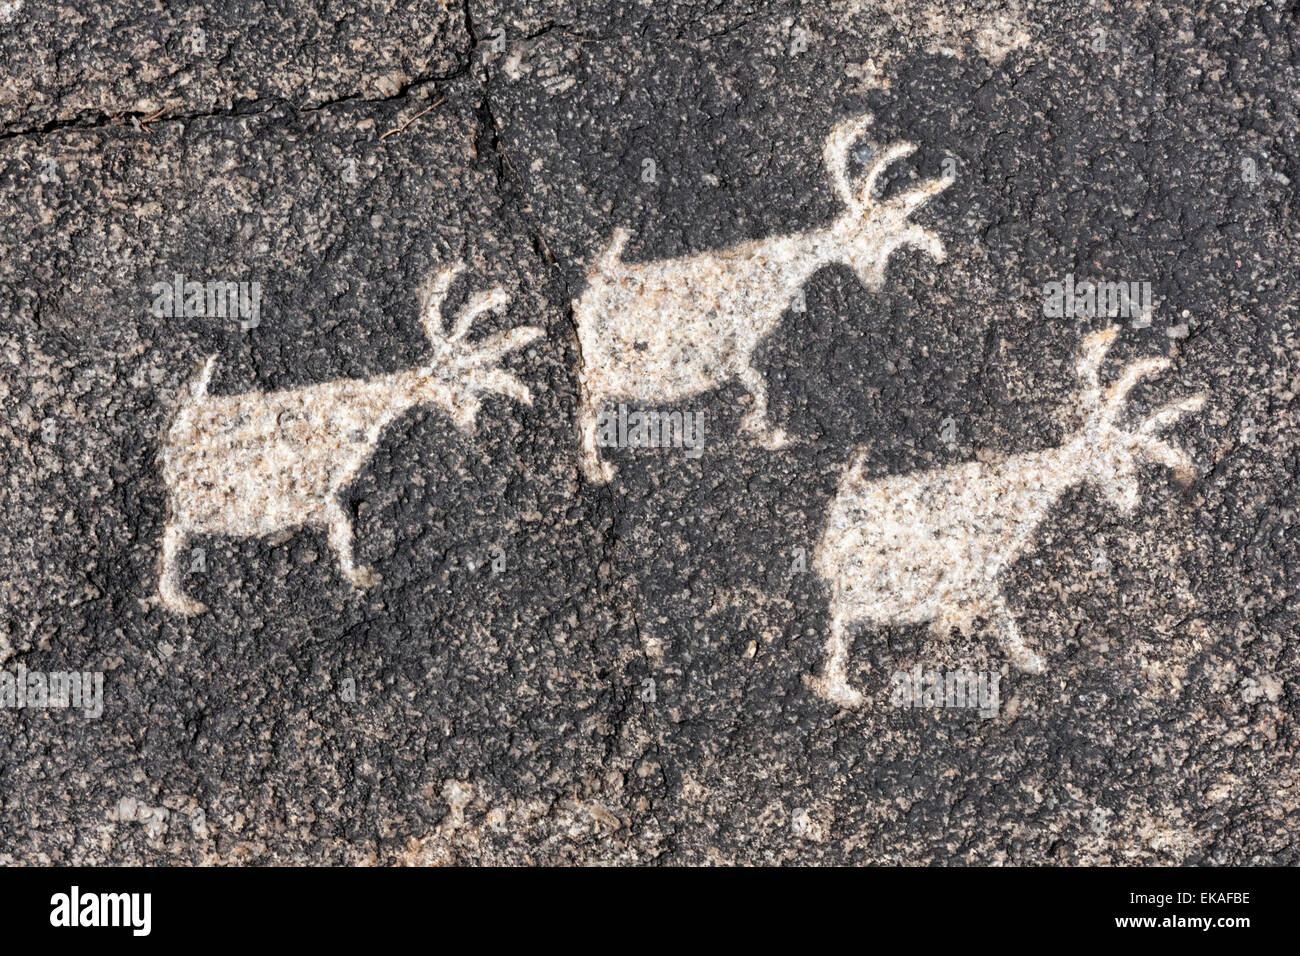 Petroglyphs created by the Hohokam Indians, who occupied the valleys around Phoenix and Tucson between 300Ð1500 C.E. Stock Photo